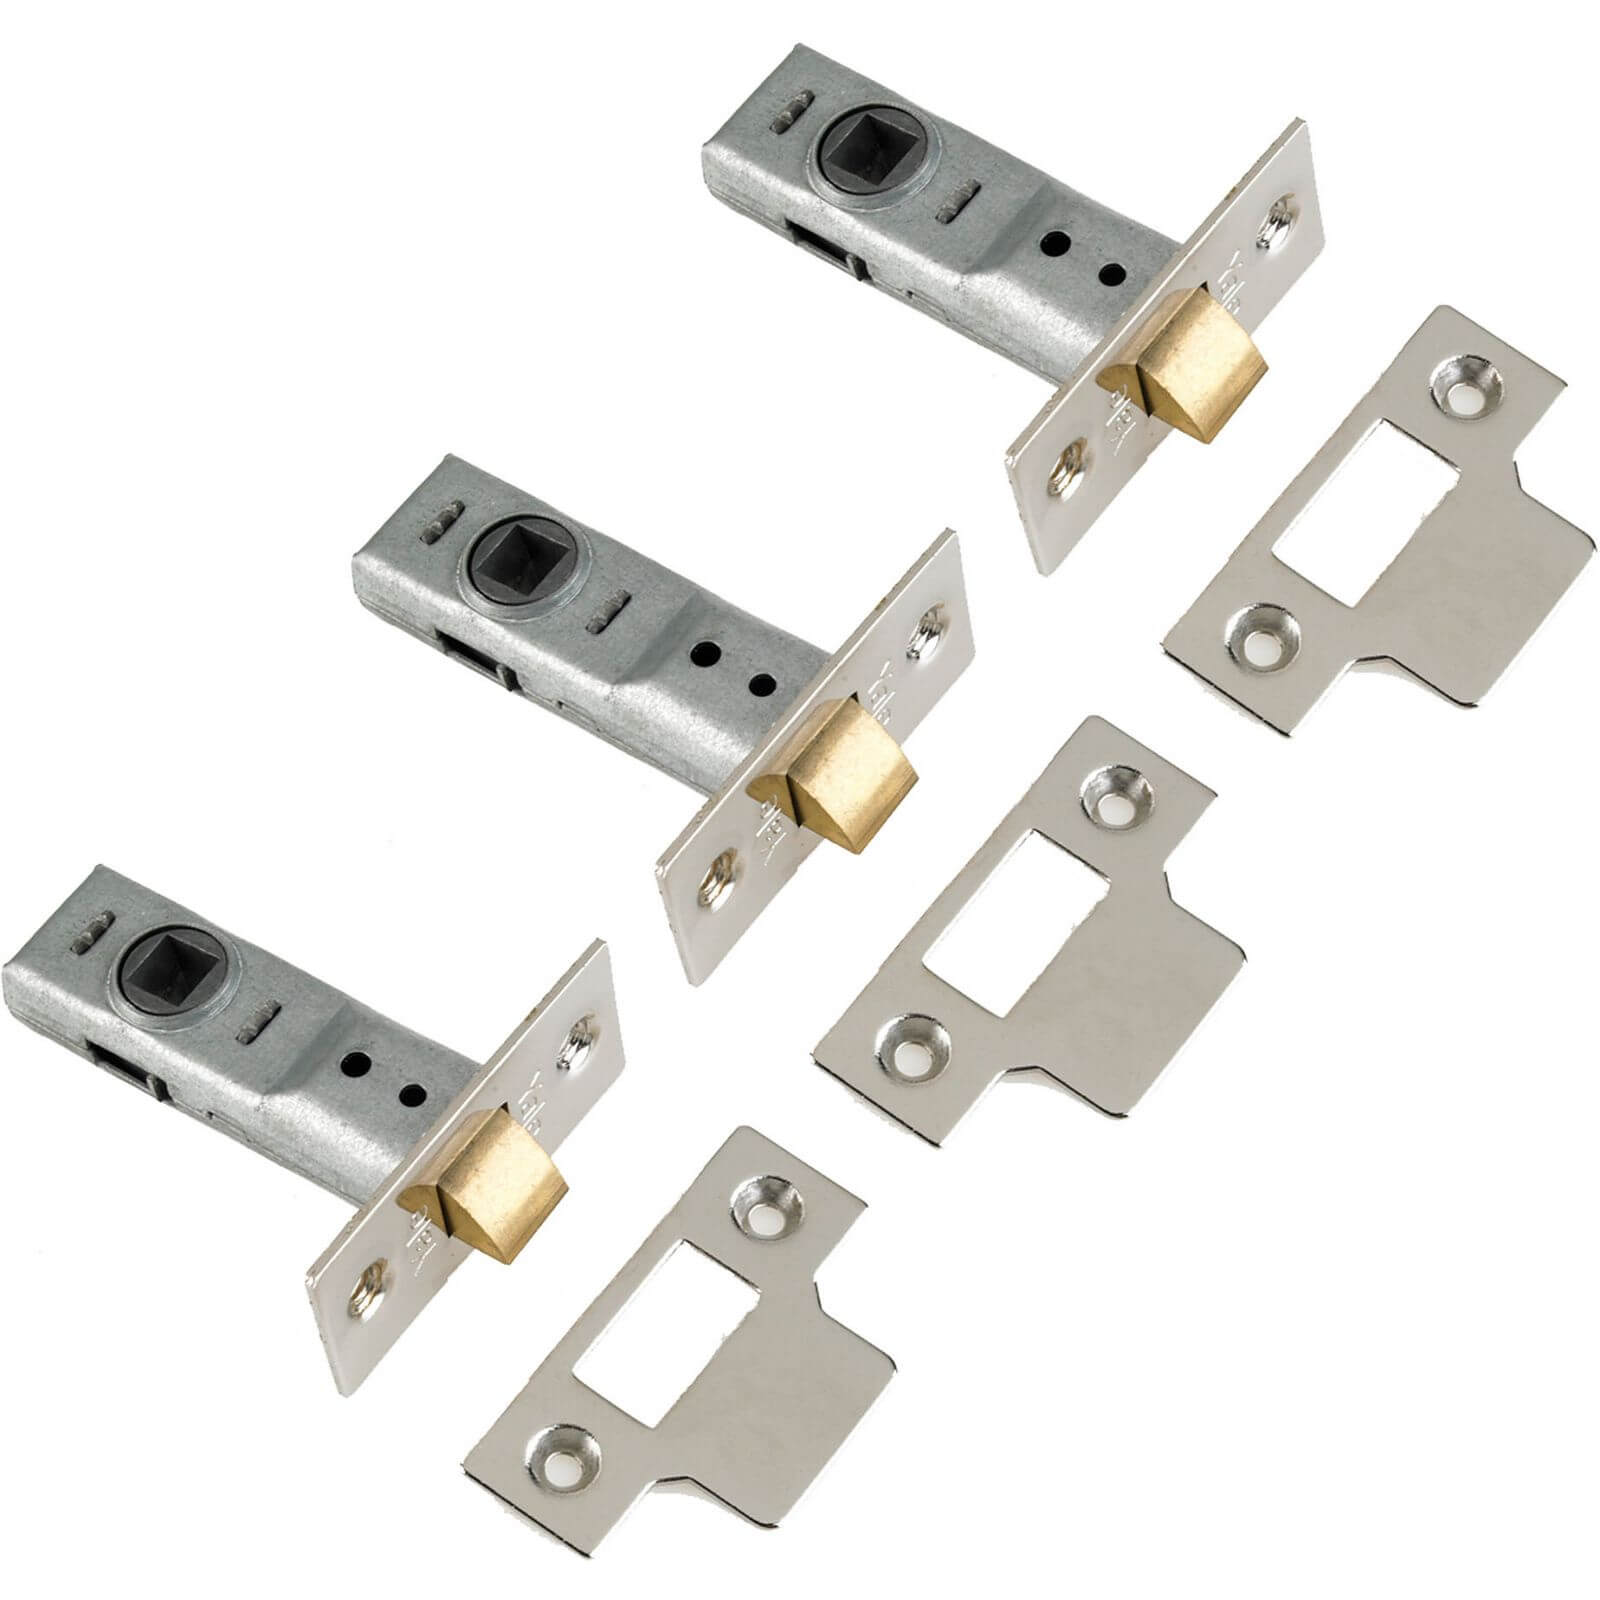 Photo of Yale Tubular Latch 64mm / 2.5 Inches - Chrome - 3 Pack